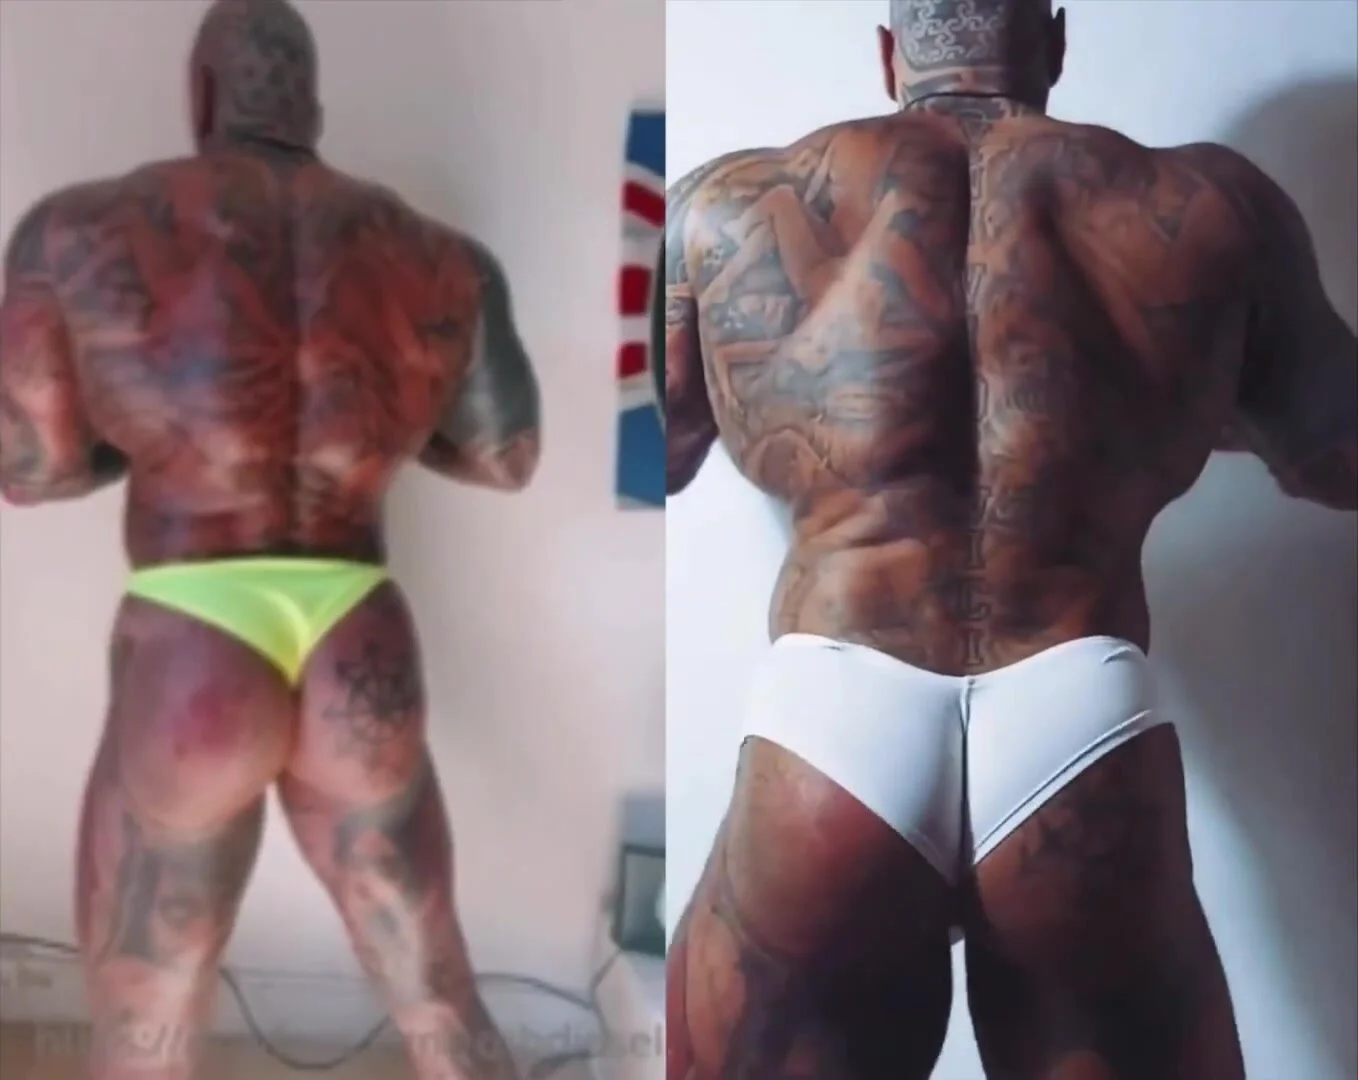 1358px x 1080px - Str8 porn star show his tattooed muscle body - ThisVid.com